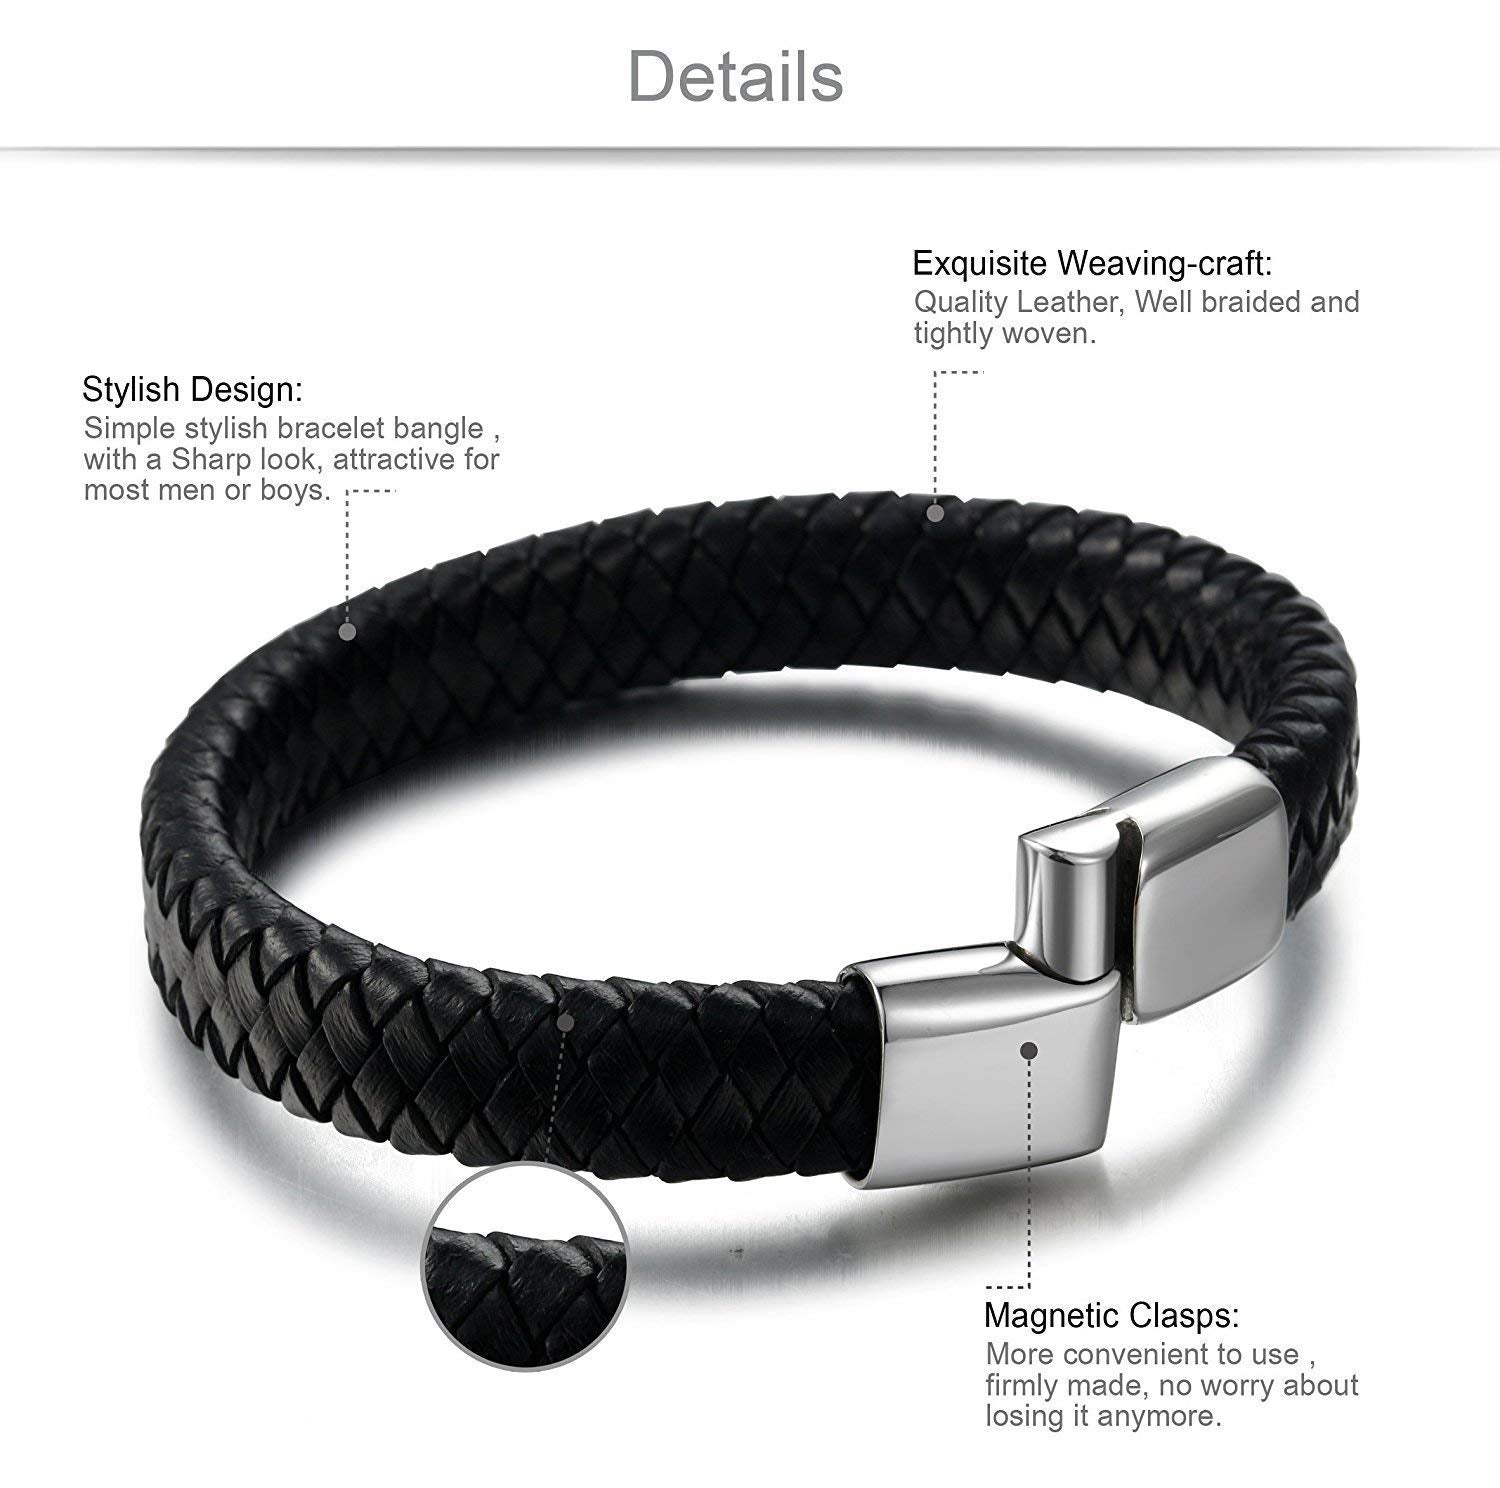 Double Layer Woven Leather Mens Leather Charm Bracelet With Rope Wrap  Classic Stainless Steel Mens Bridal Accessory For DIY Customization From  Faflwing, $5.9 | DHgate.Com